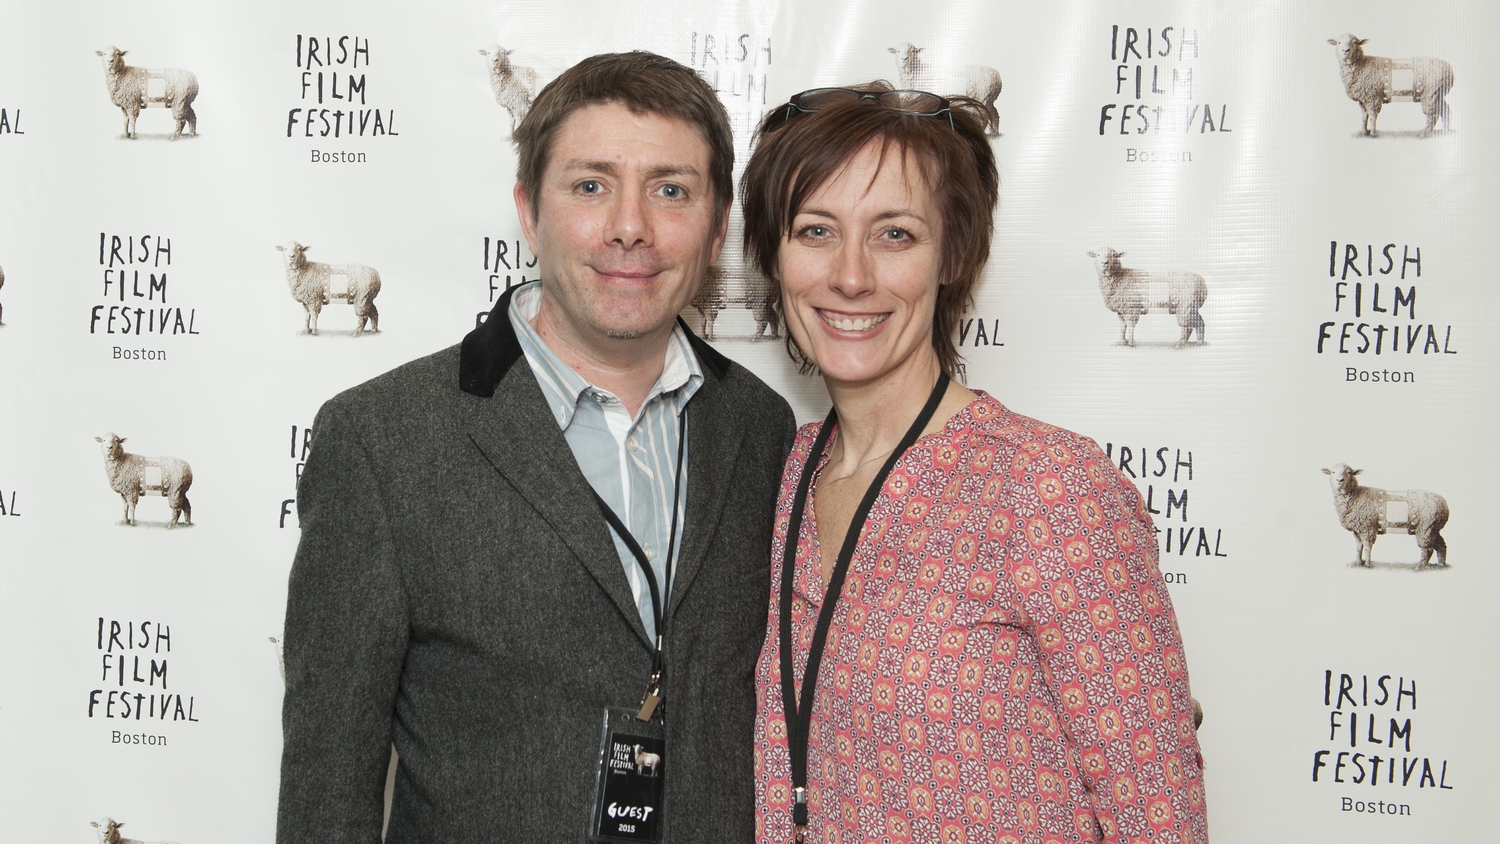  Director Damien O'Connor (ANYA) and Dawn Morrissey 